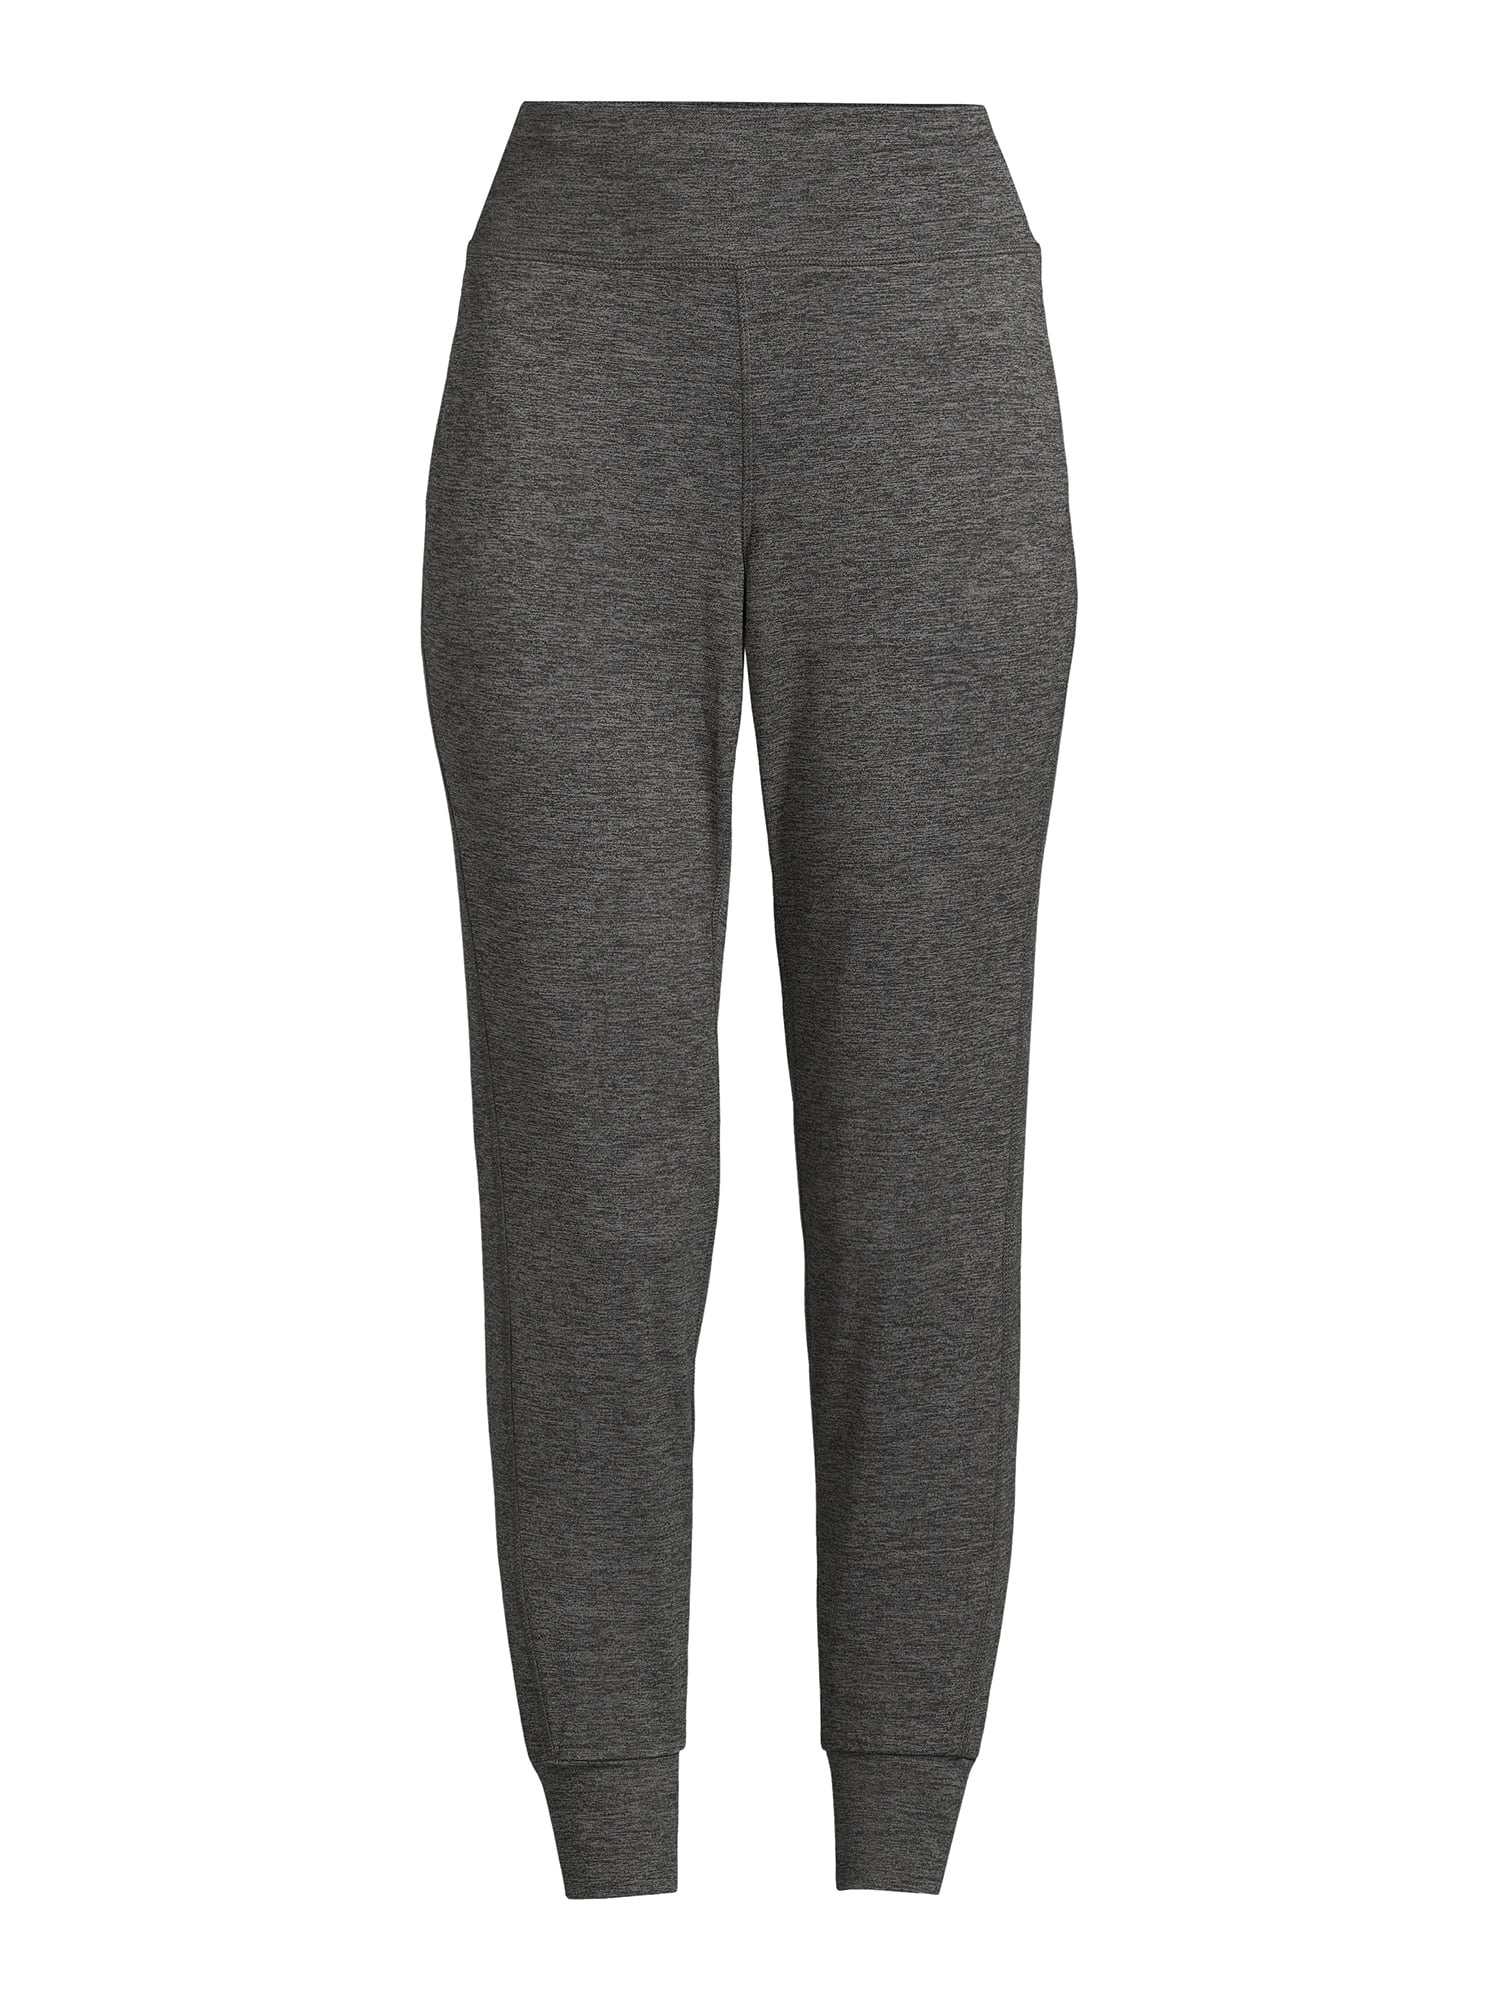 Athletic Works Women's Jogger Track Pant with Side Retro Stripes - Walmart .com